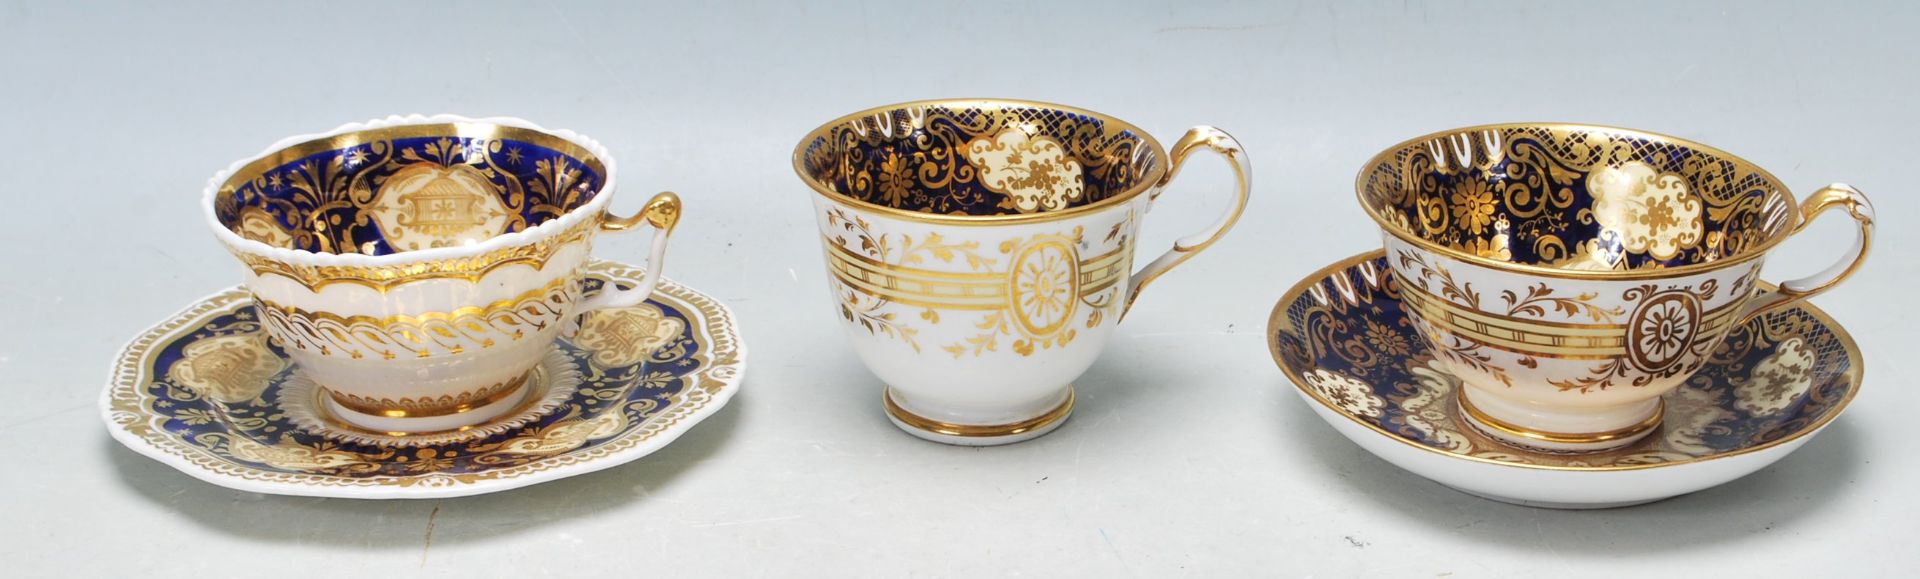 GROUP OF FIVE 19TH CENTURY VICTORIAN CABINET CUPS AND SAUCERS